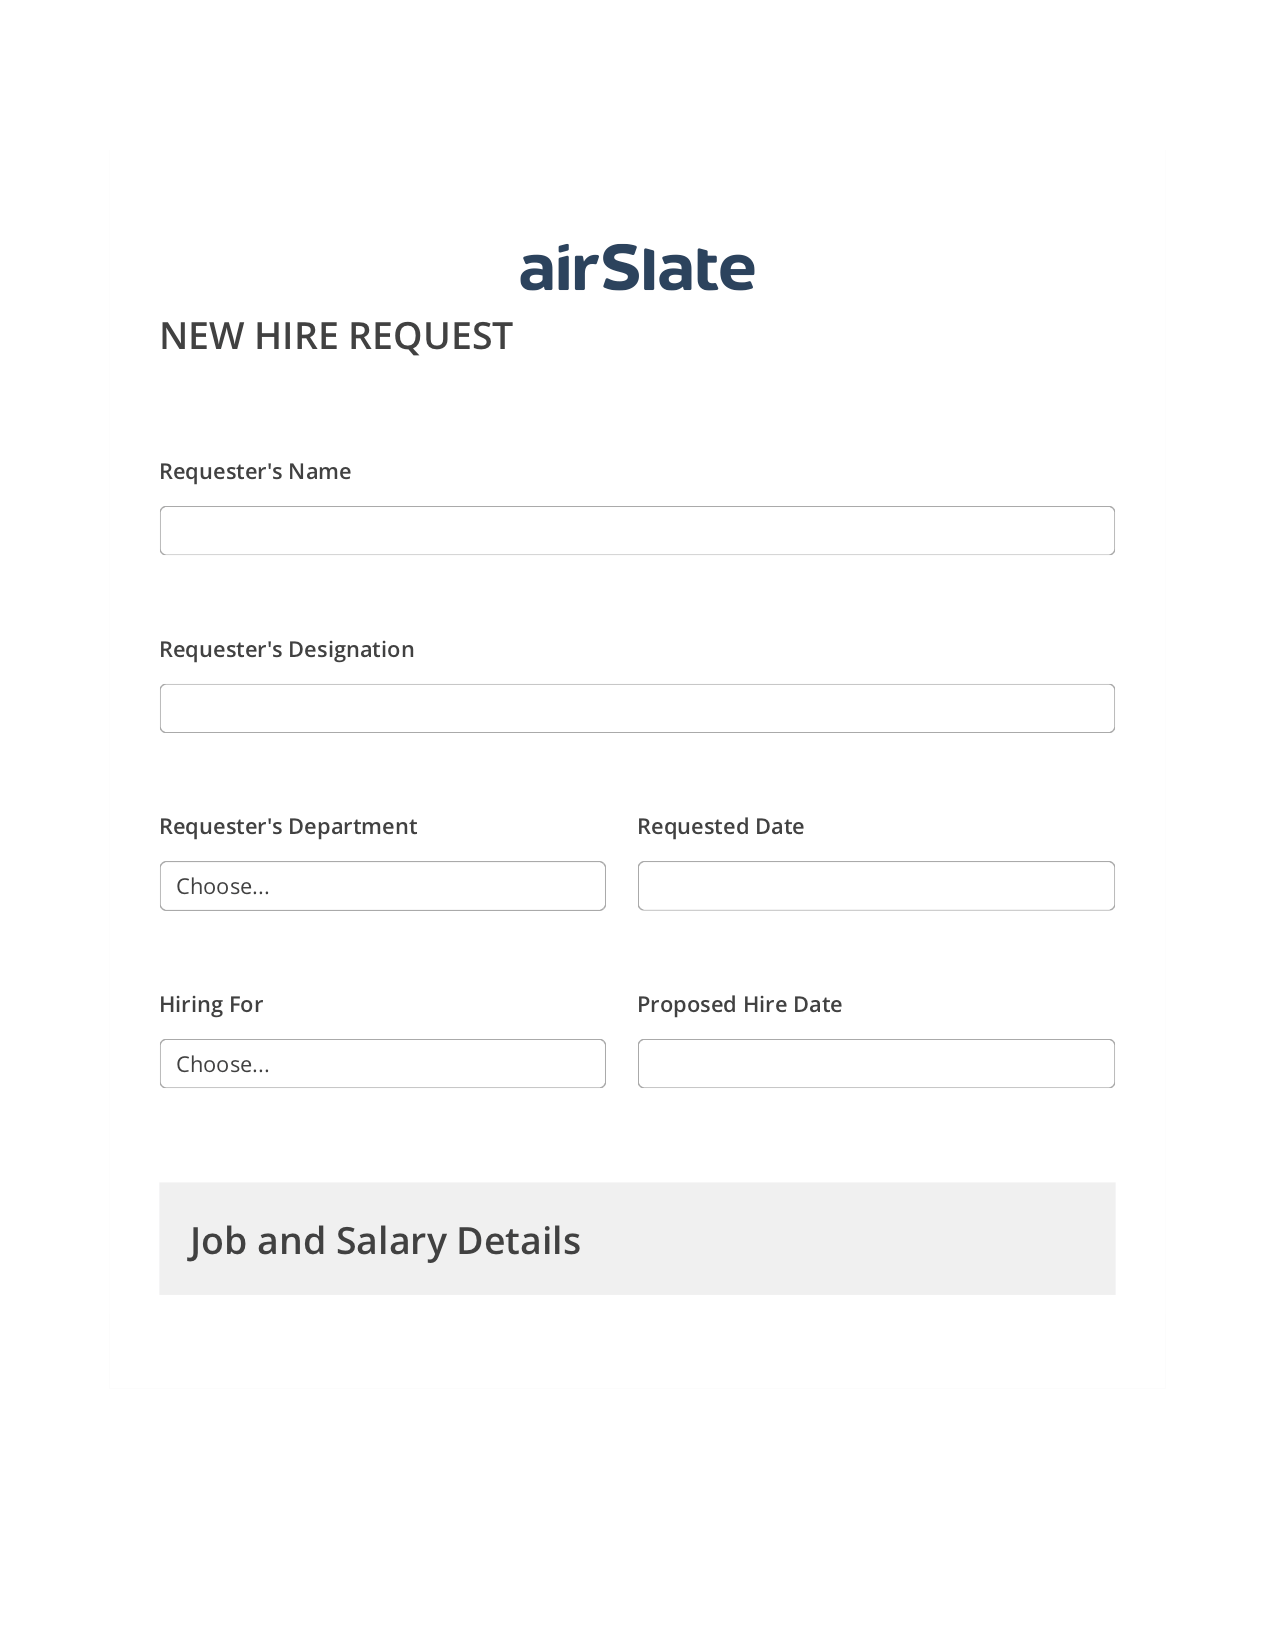 Hiring Request Workflow Pre-fill Dropdowns from CSV file Bot, Export to MS Dynamics 365 Bot, Archive to OneDrive Bot